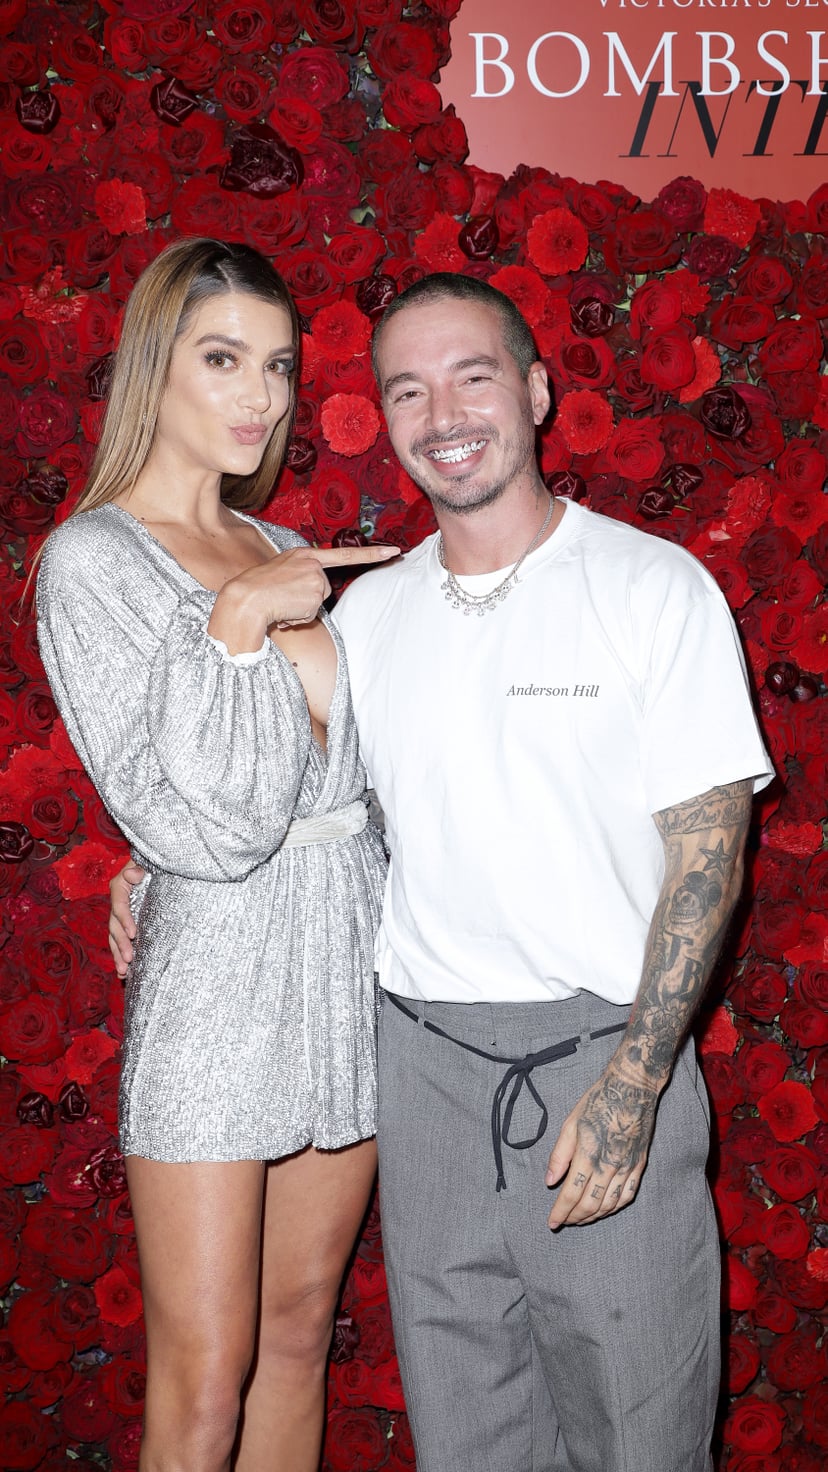 NEW YORK, NEW YORK - SEPTEMBER 05:  (EDITORS NOTE: Retransmission with alternate crop.) Valentina Ferrer and Jay Balvin attends Victoria's Secret Angel Sara Sampaio Hosts The Bombshell Intense Launch Party on September 05, 2019 in New York City. (Photo by